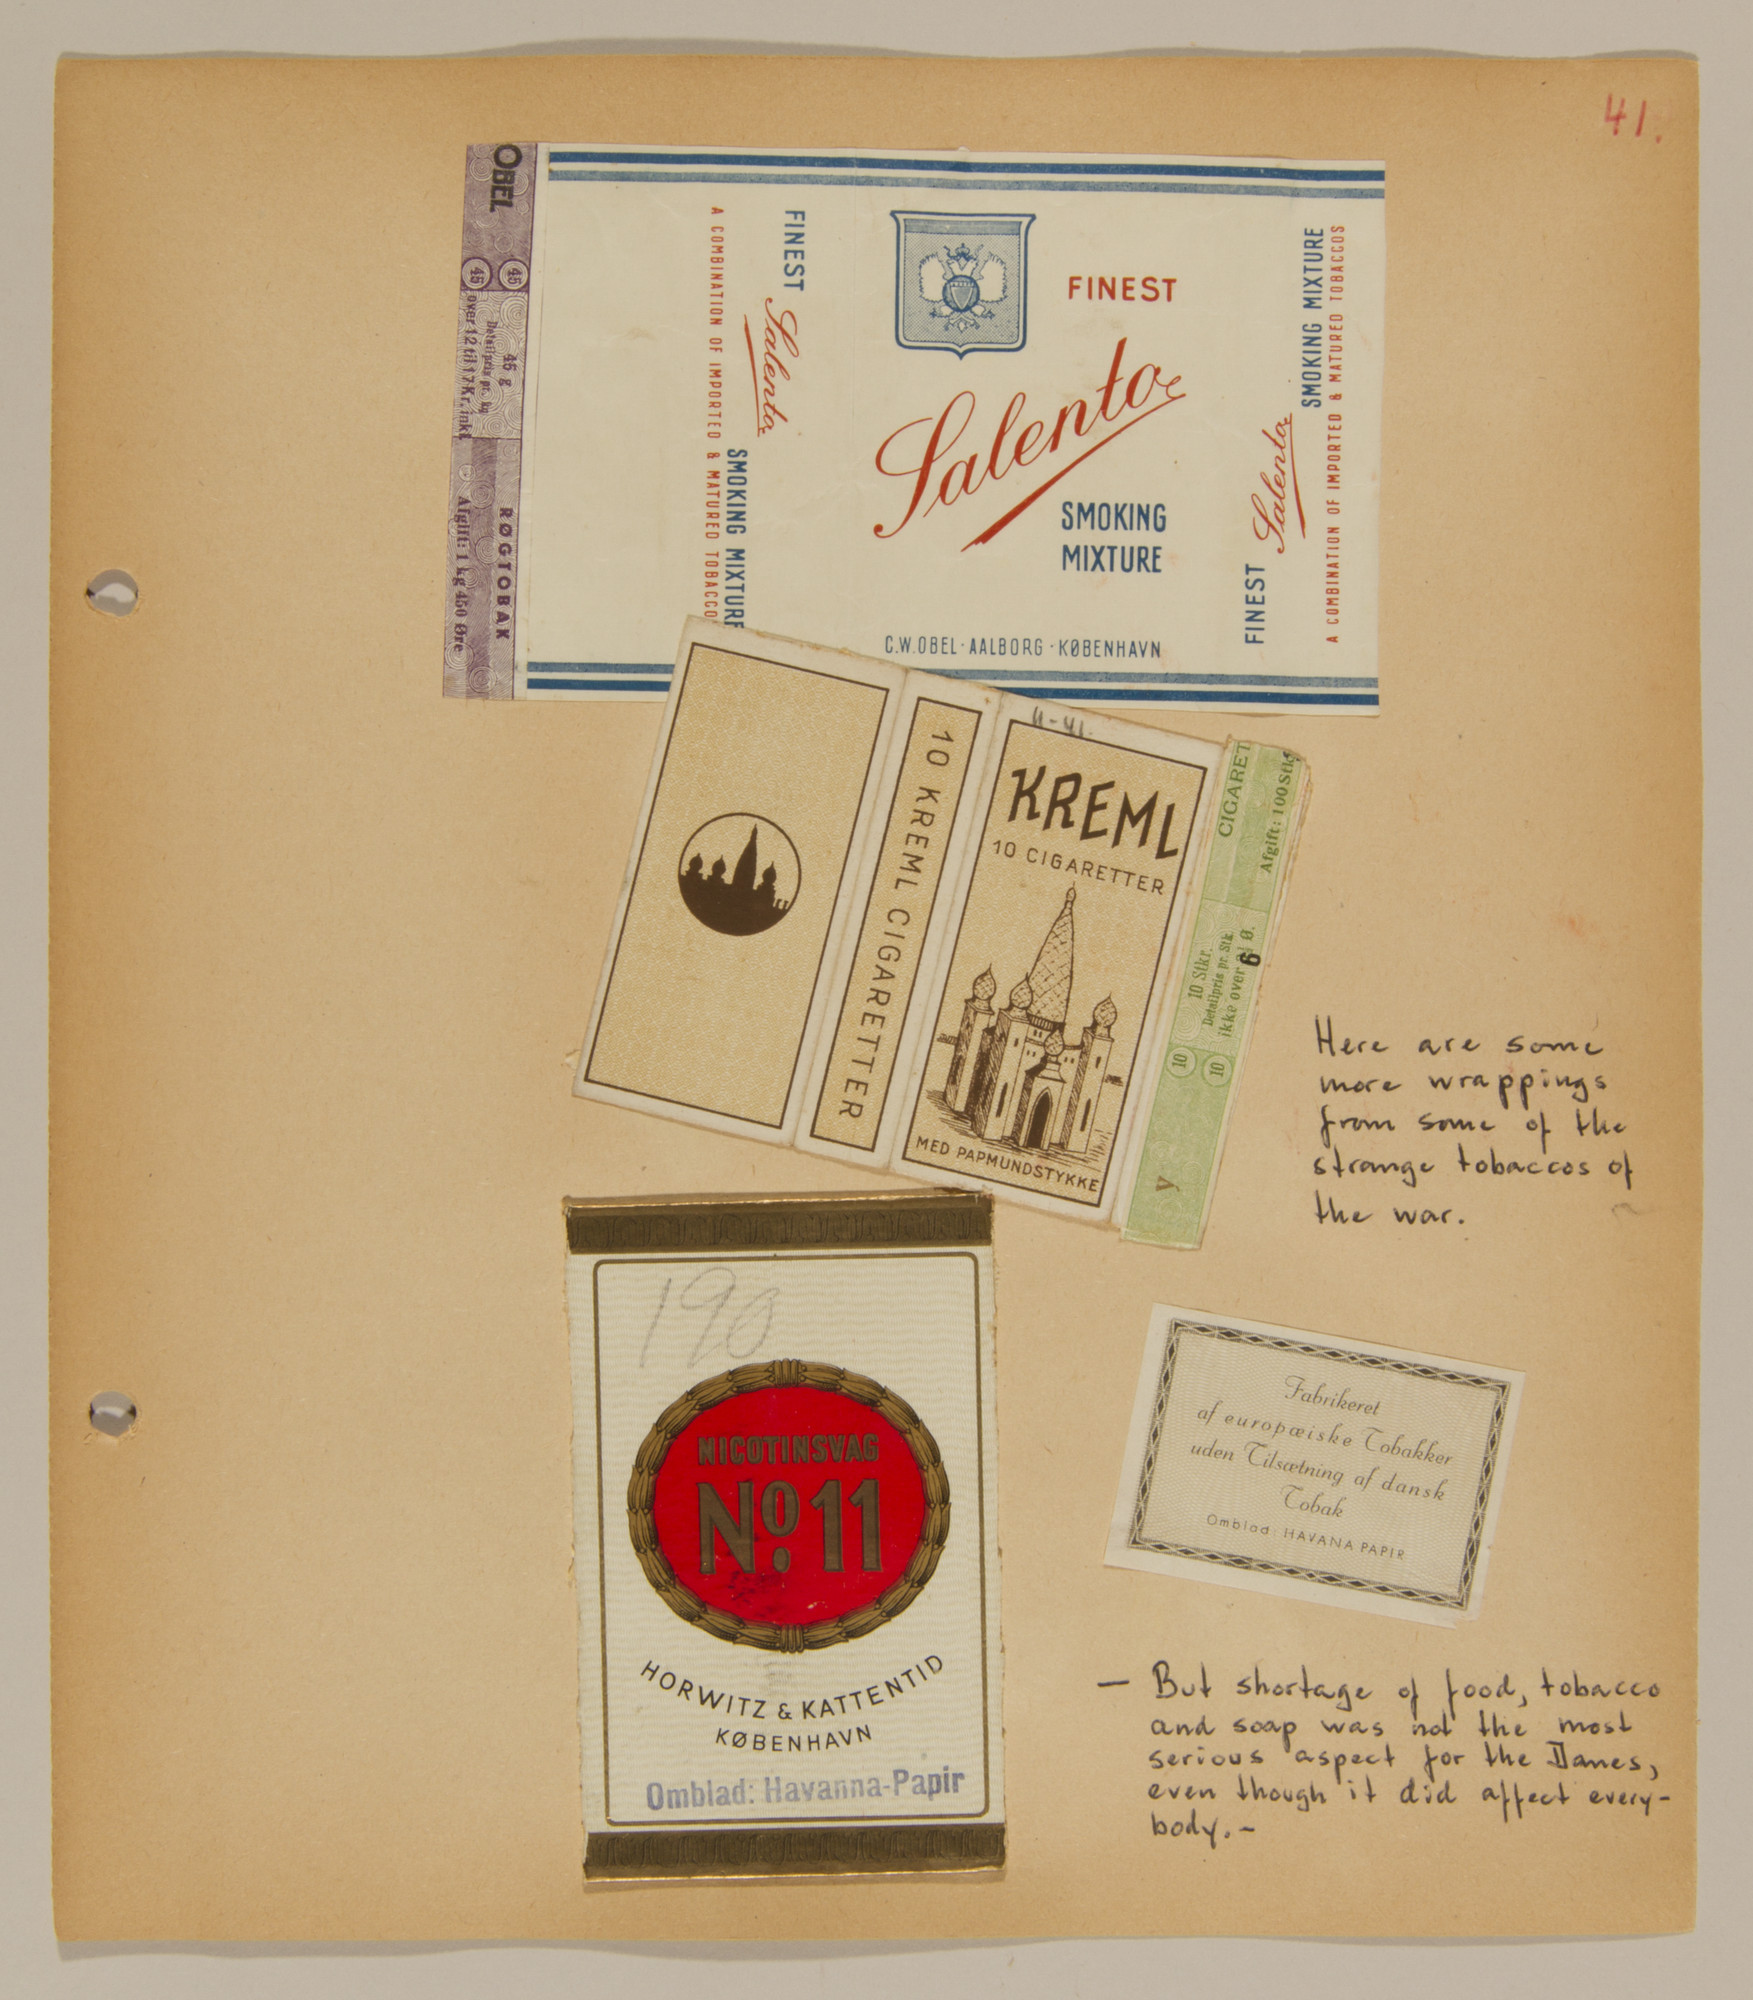 Page from volume one of a set of scrapbooks compiled by Bjorn Sibbern, a Danish policeman and resistance member, documenting the German occupation of Denmark.

Page contains labels to cigarette packages.